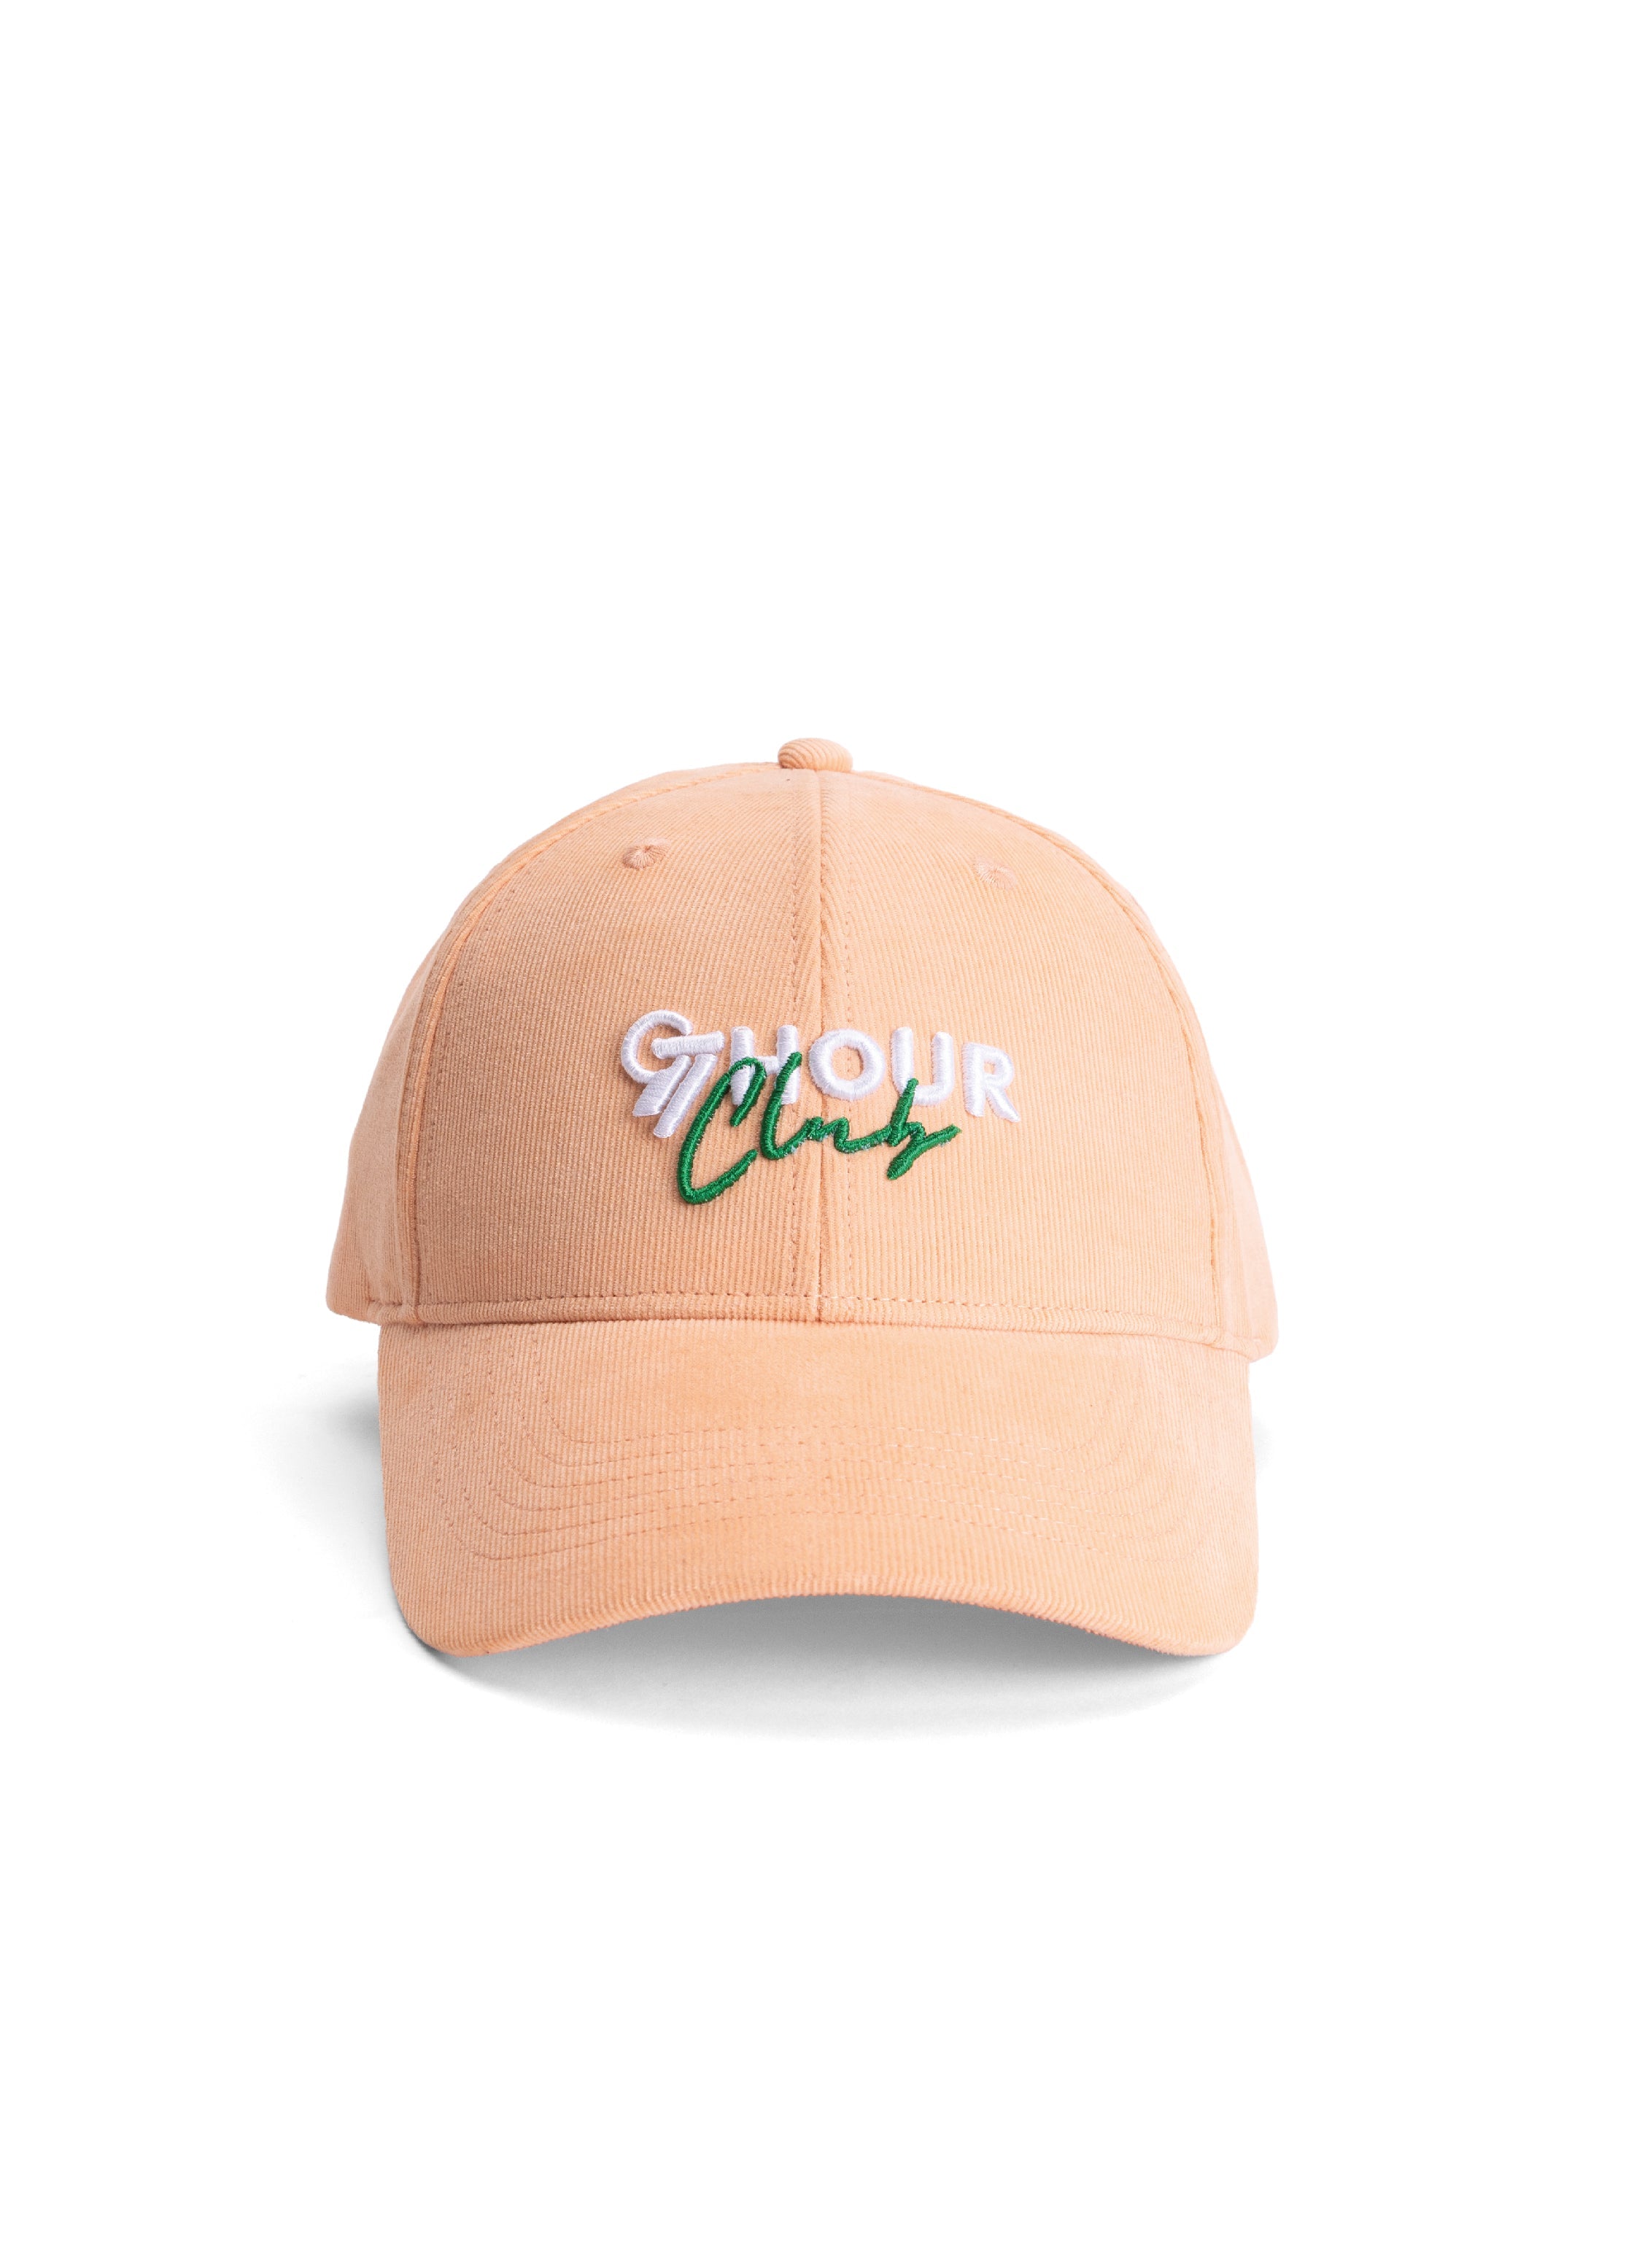 Buy The 97th Hour Peach Pincord Cap Side Look